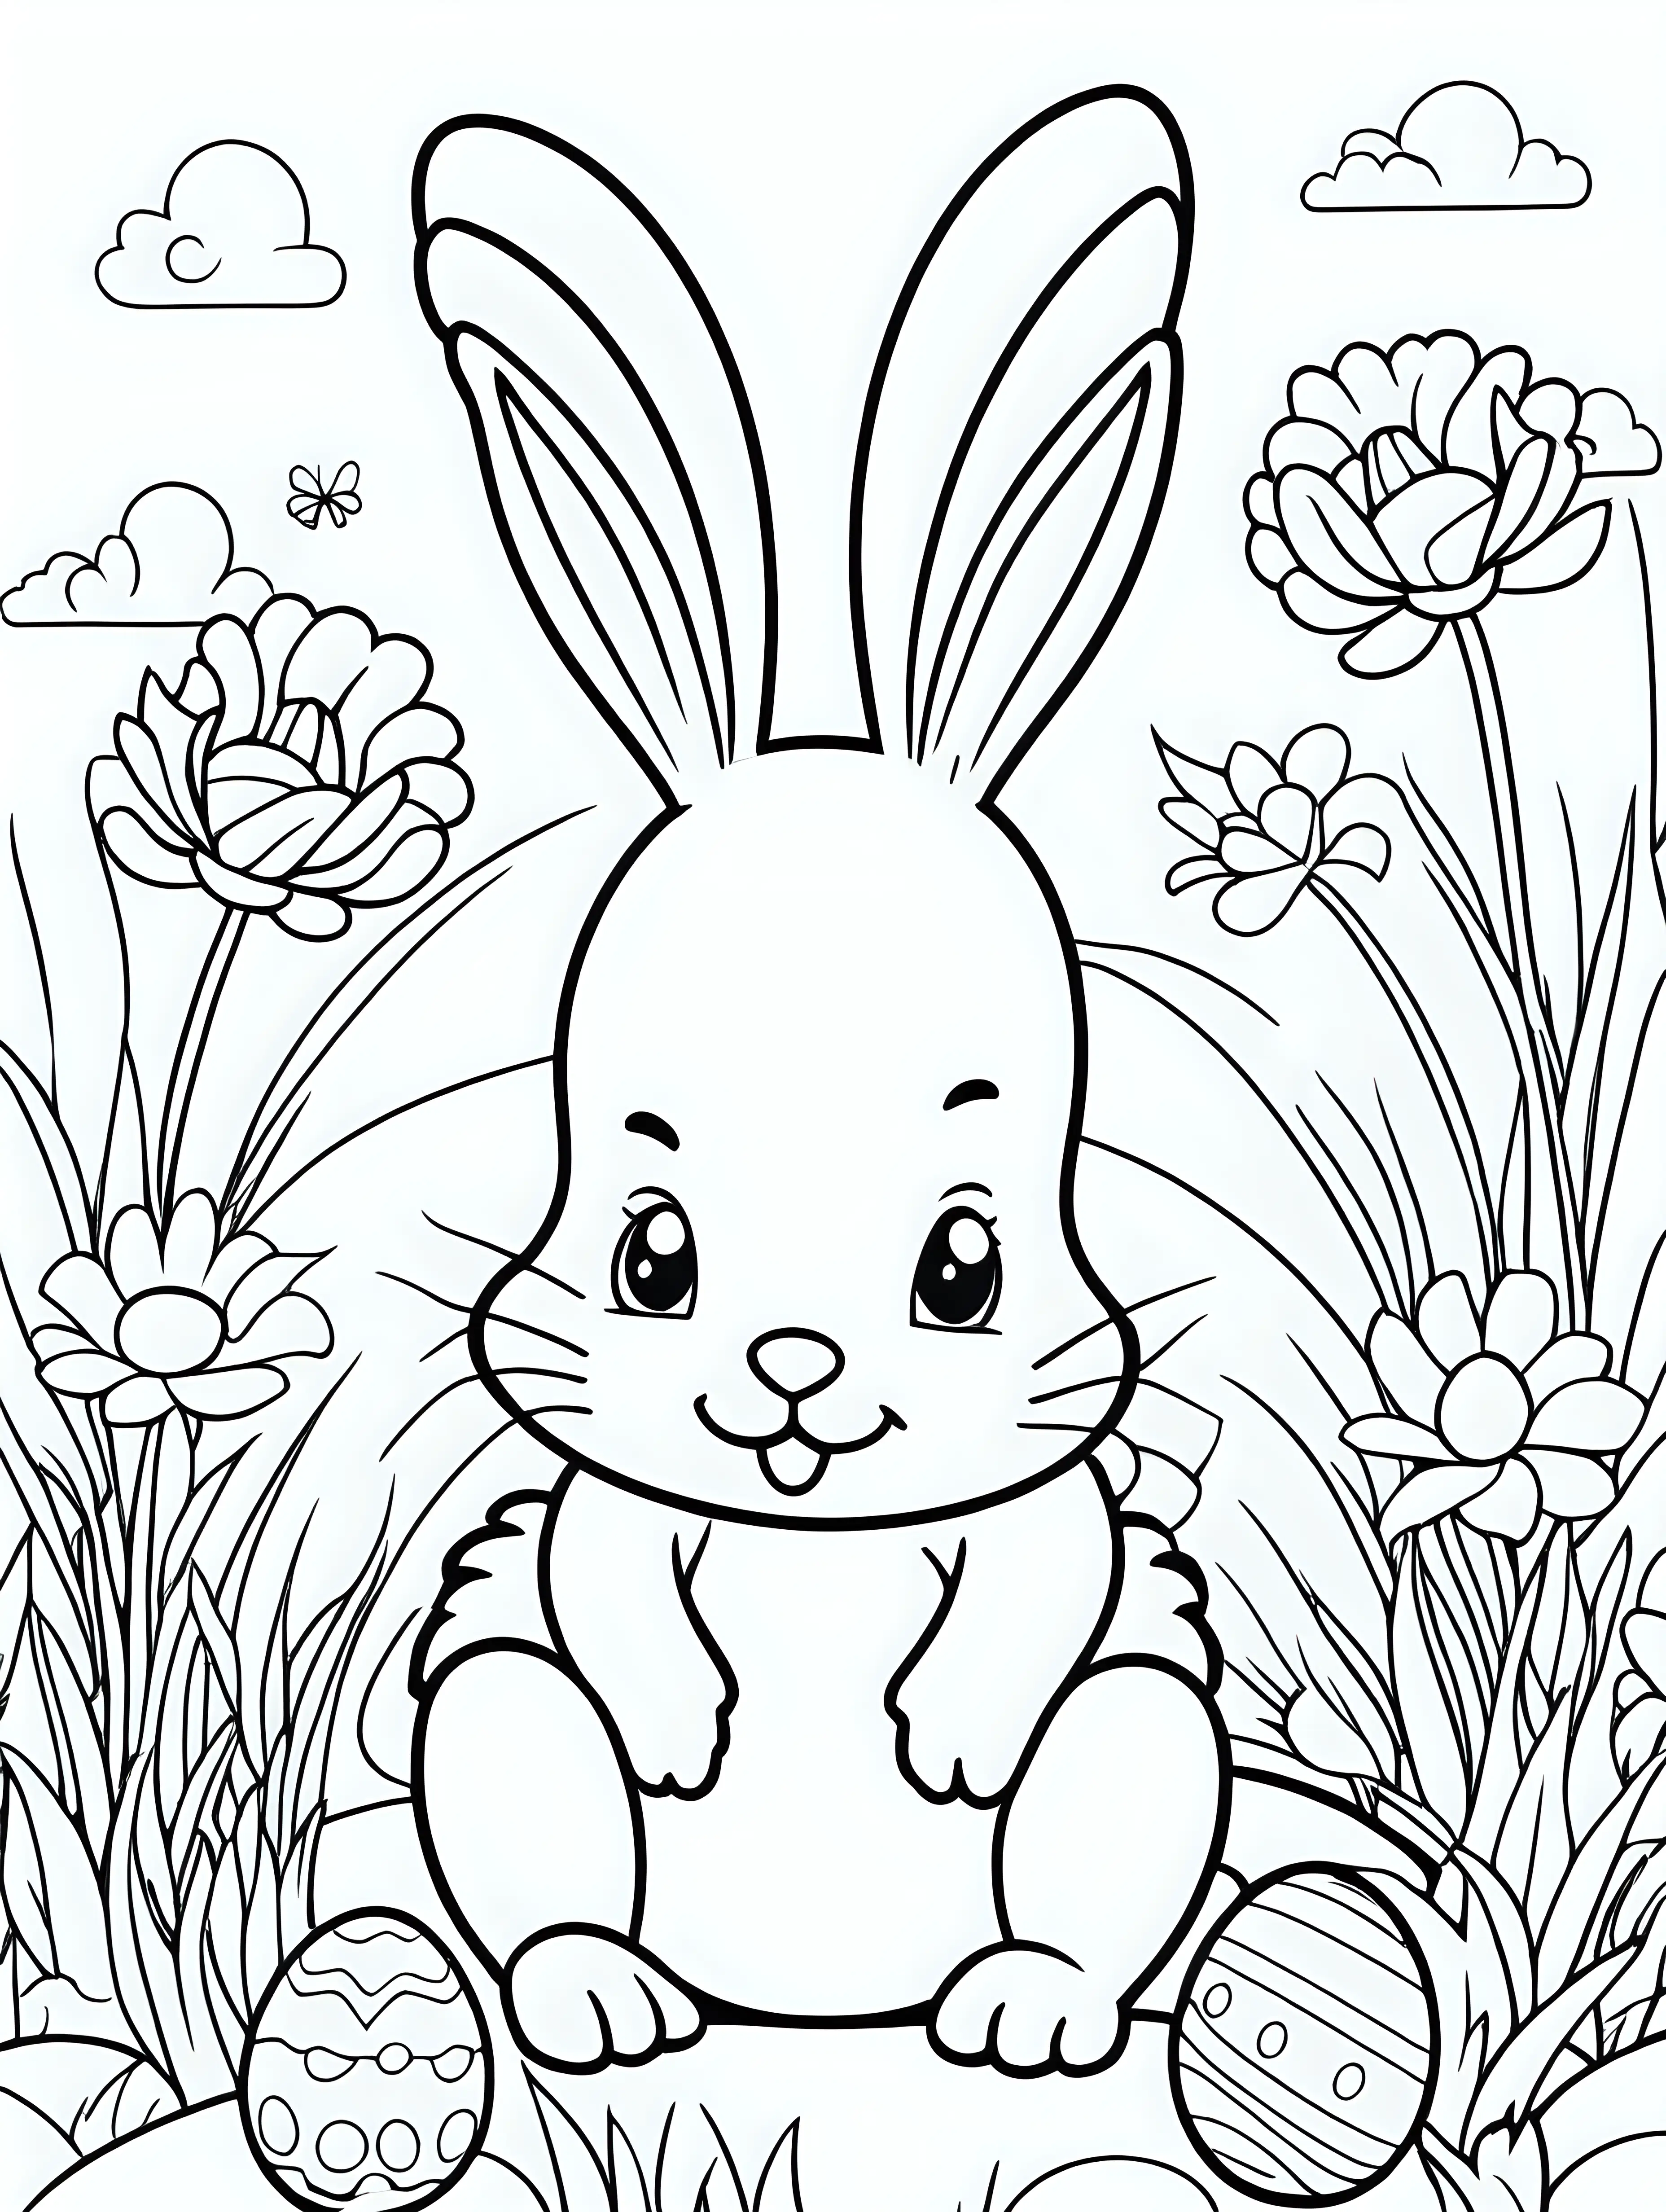 Easter Coloring Page for Kids 47 Years Clean Line Art on White Background